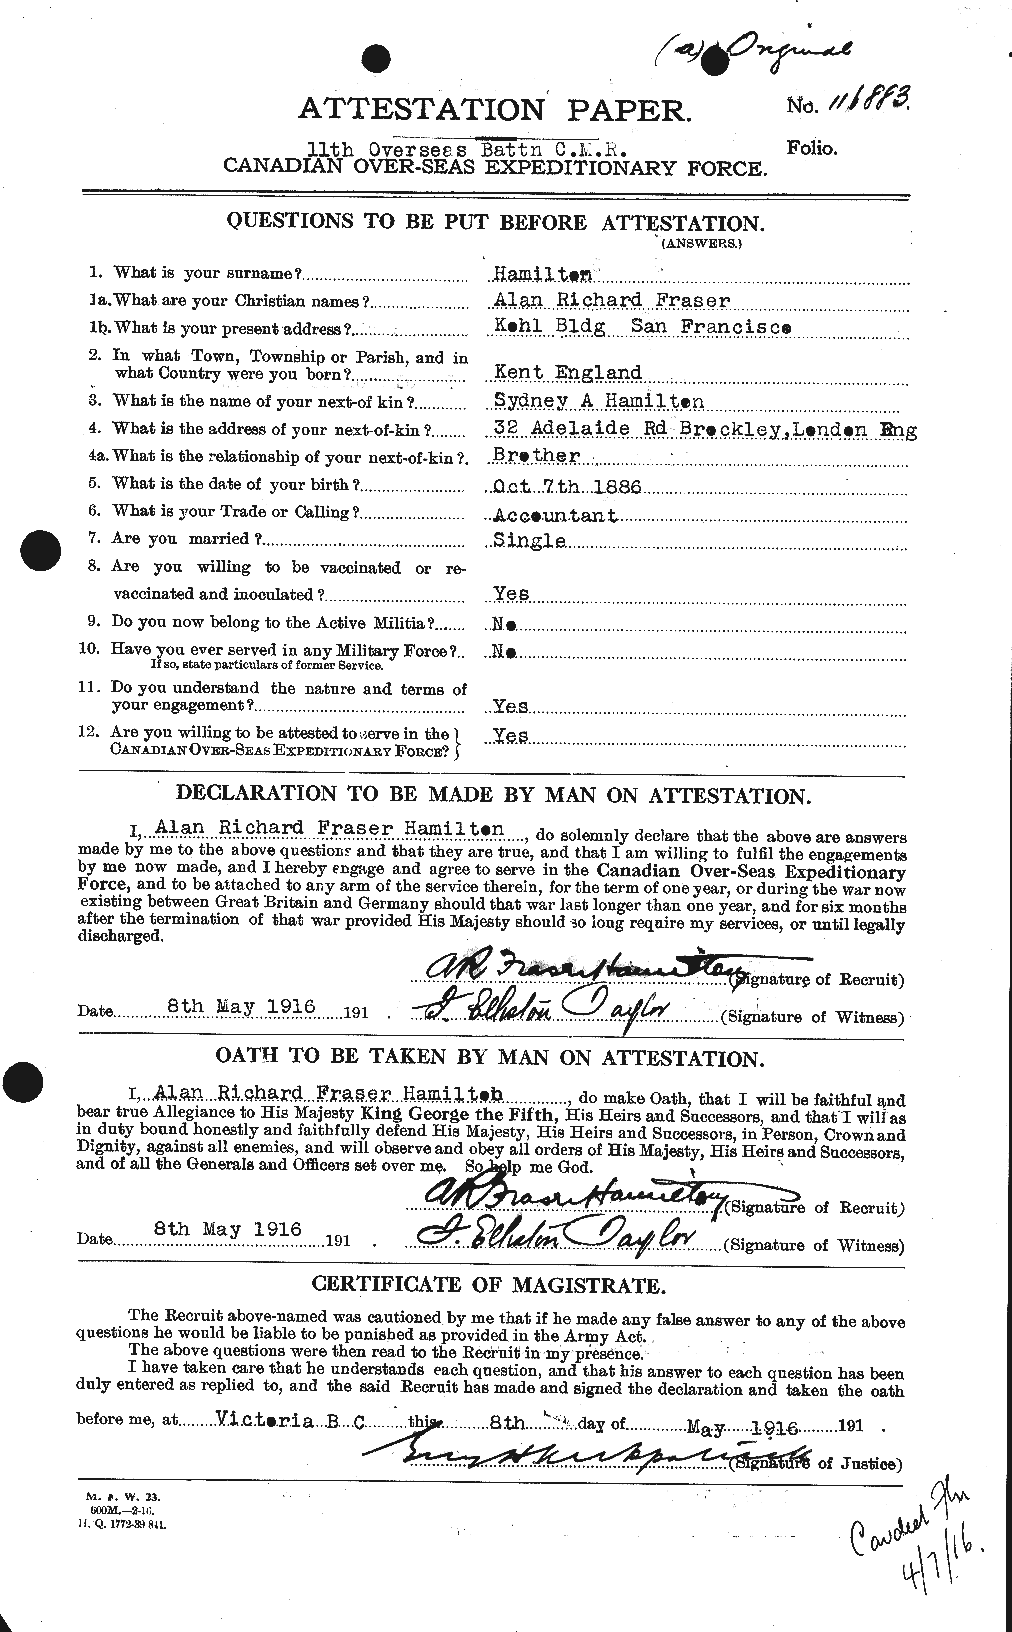 Personnel Records of the First World War - CEF 375181a